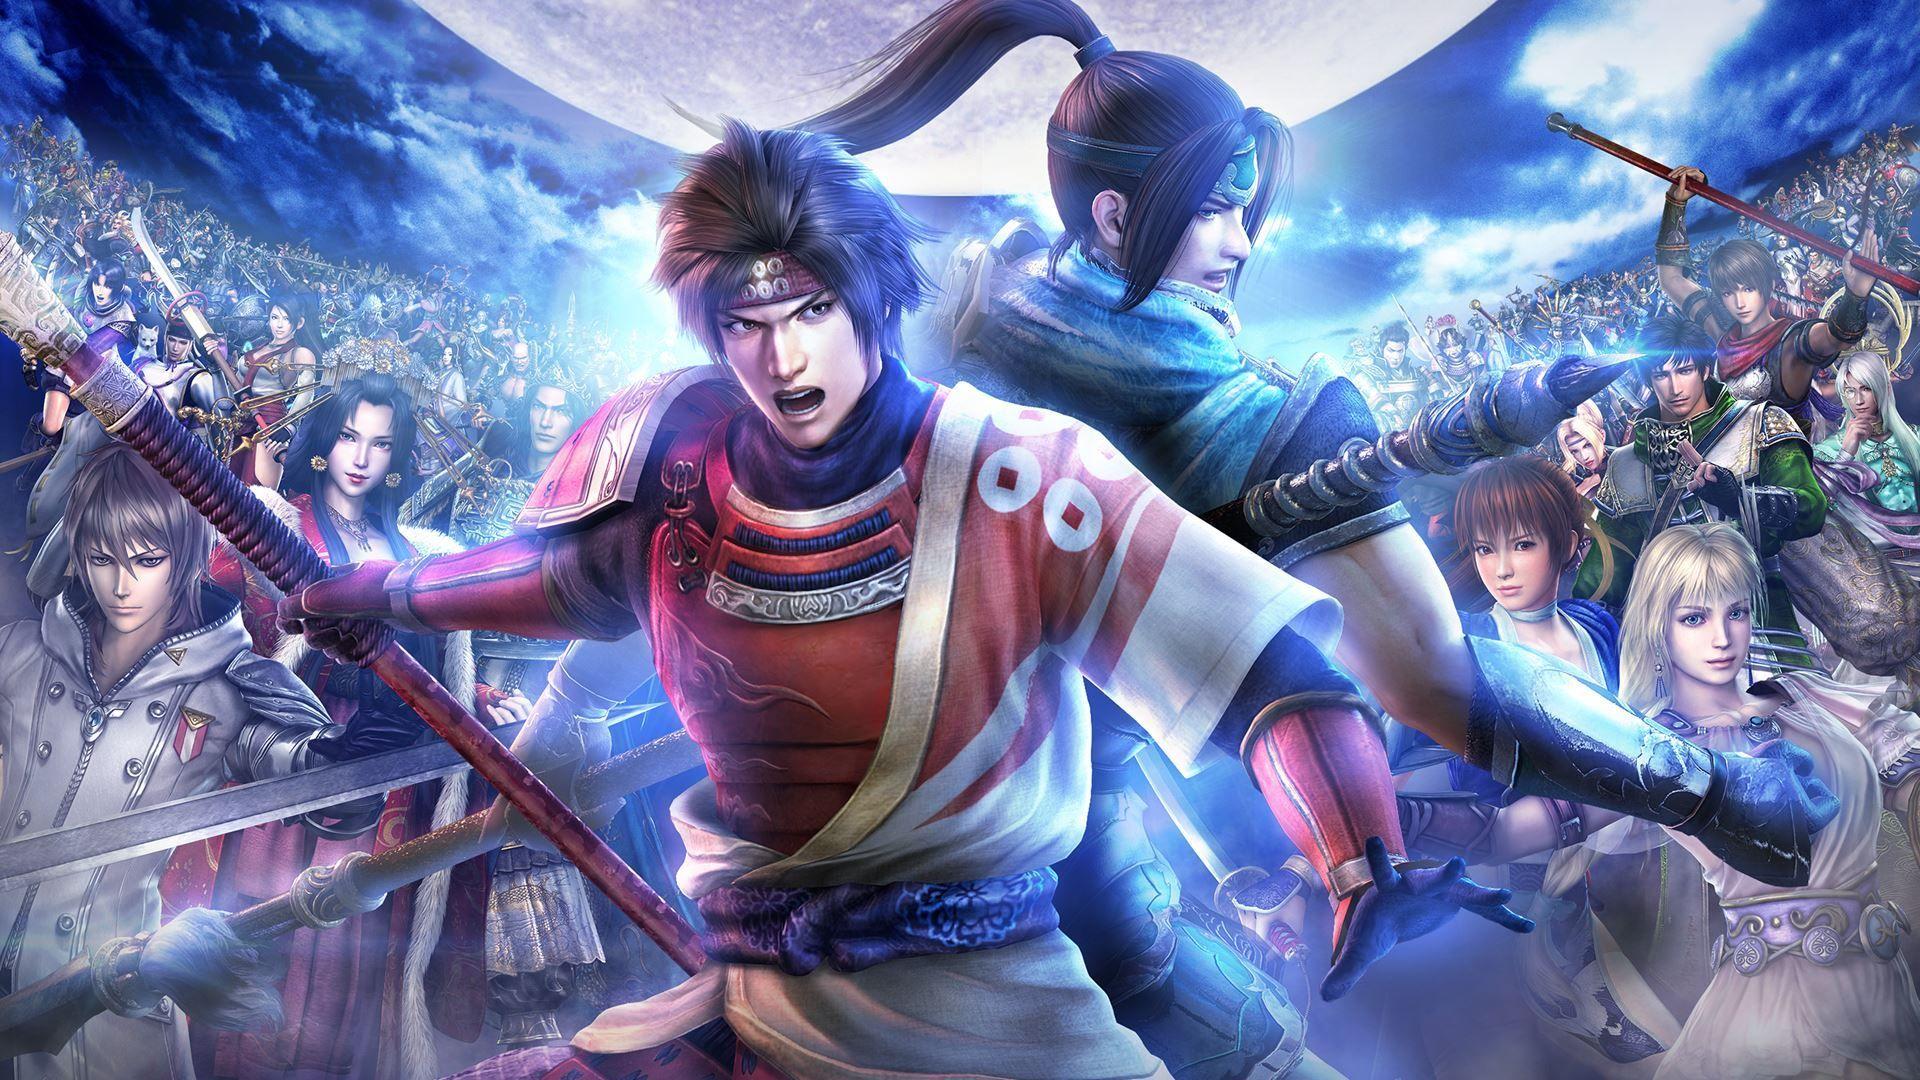 Grab Warriors Orochi 3 Ultimate and Spelunky today on Xbox Games